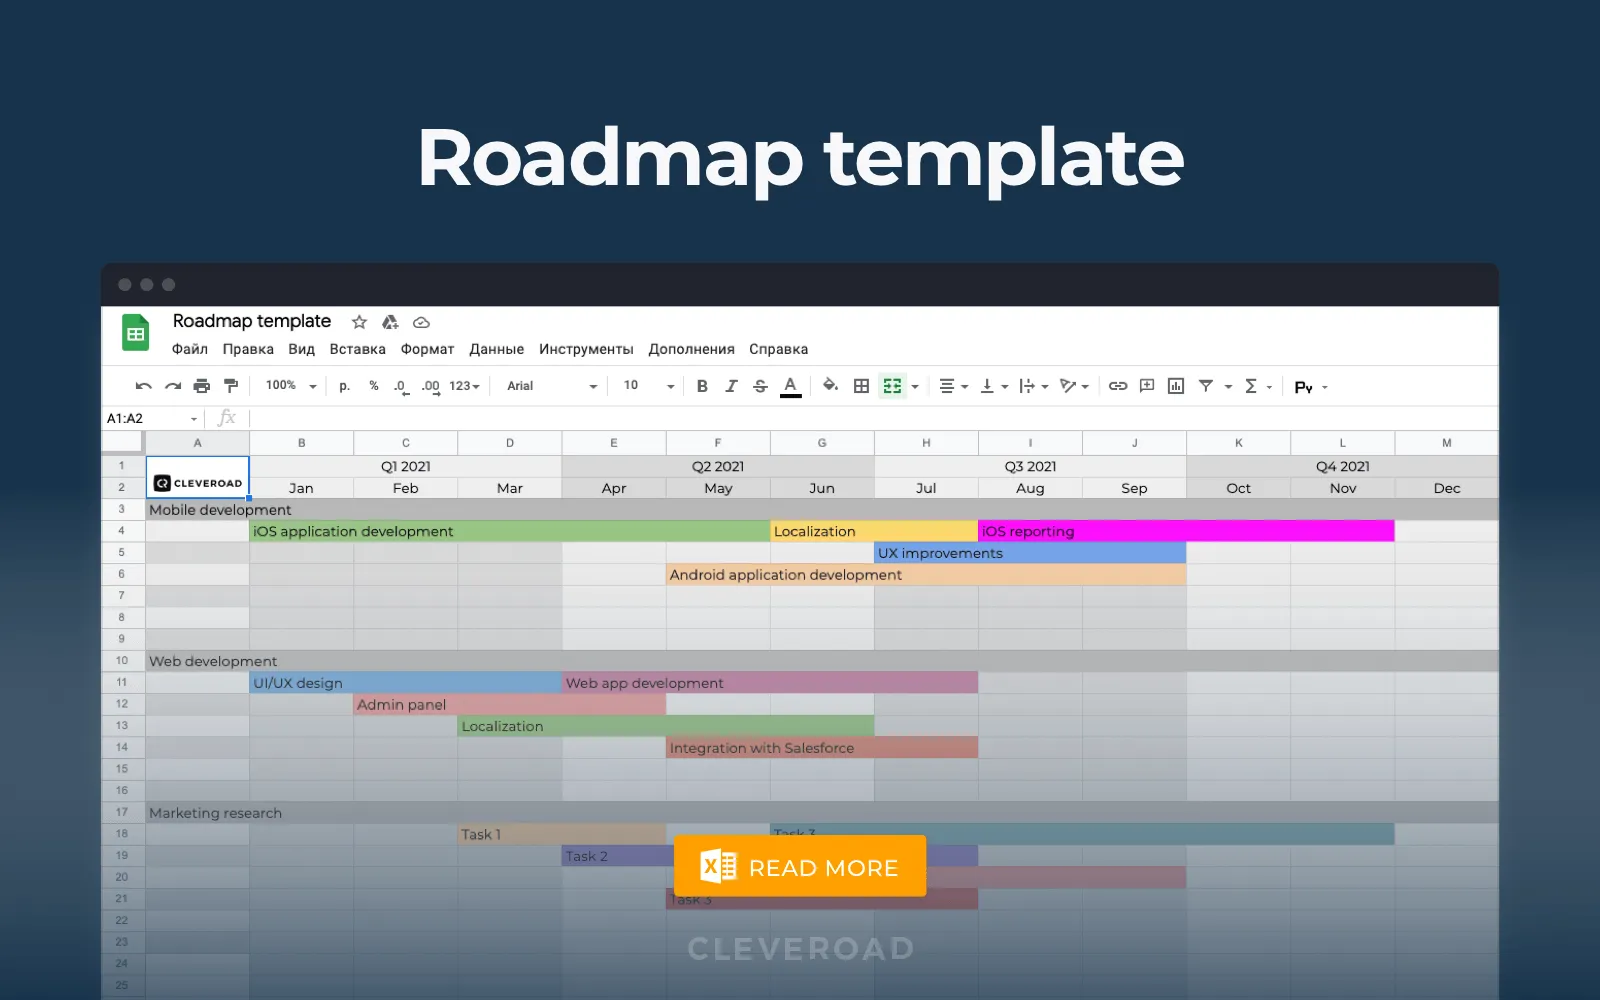 A roadmap template made by Cleveroad